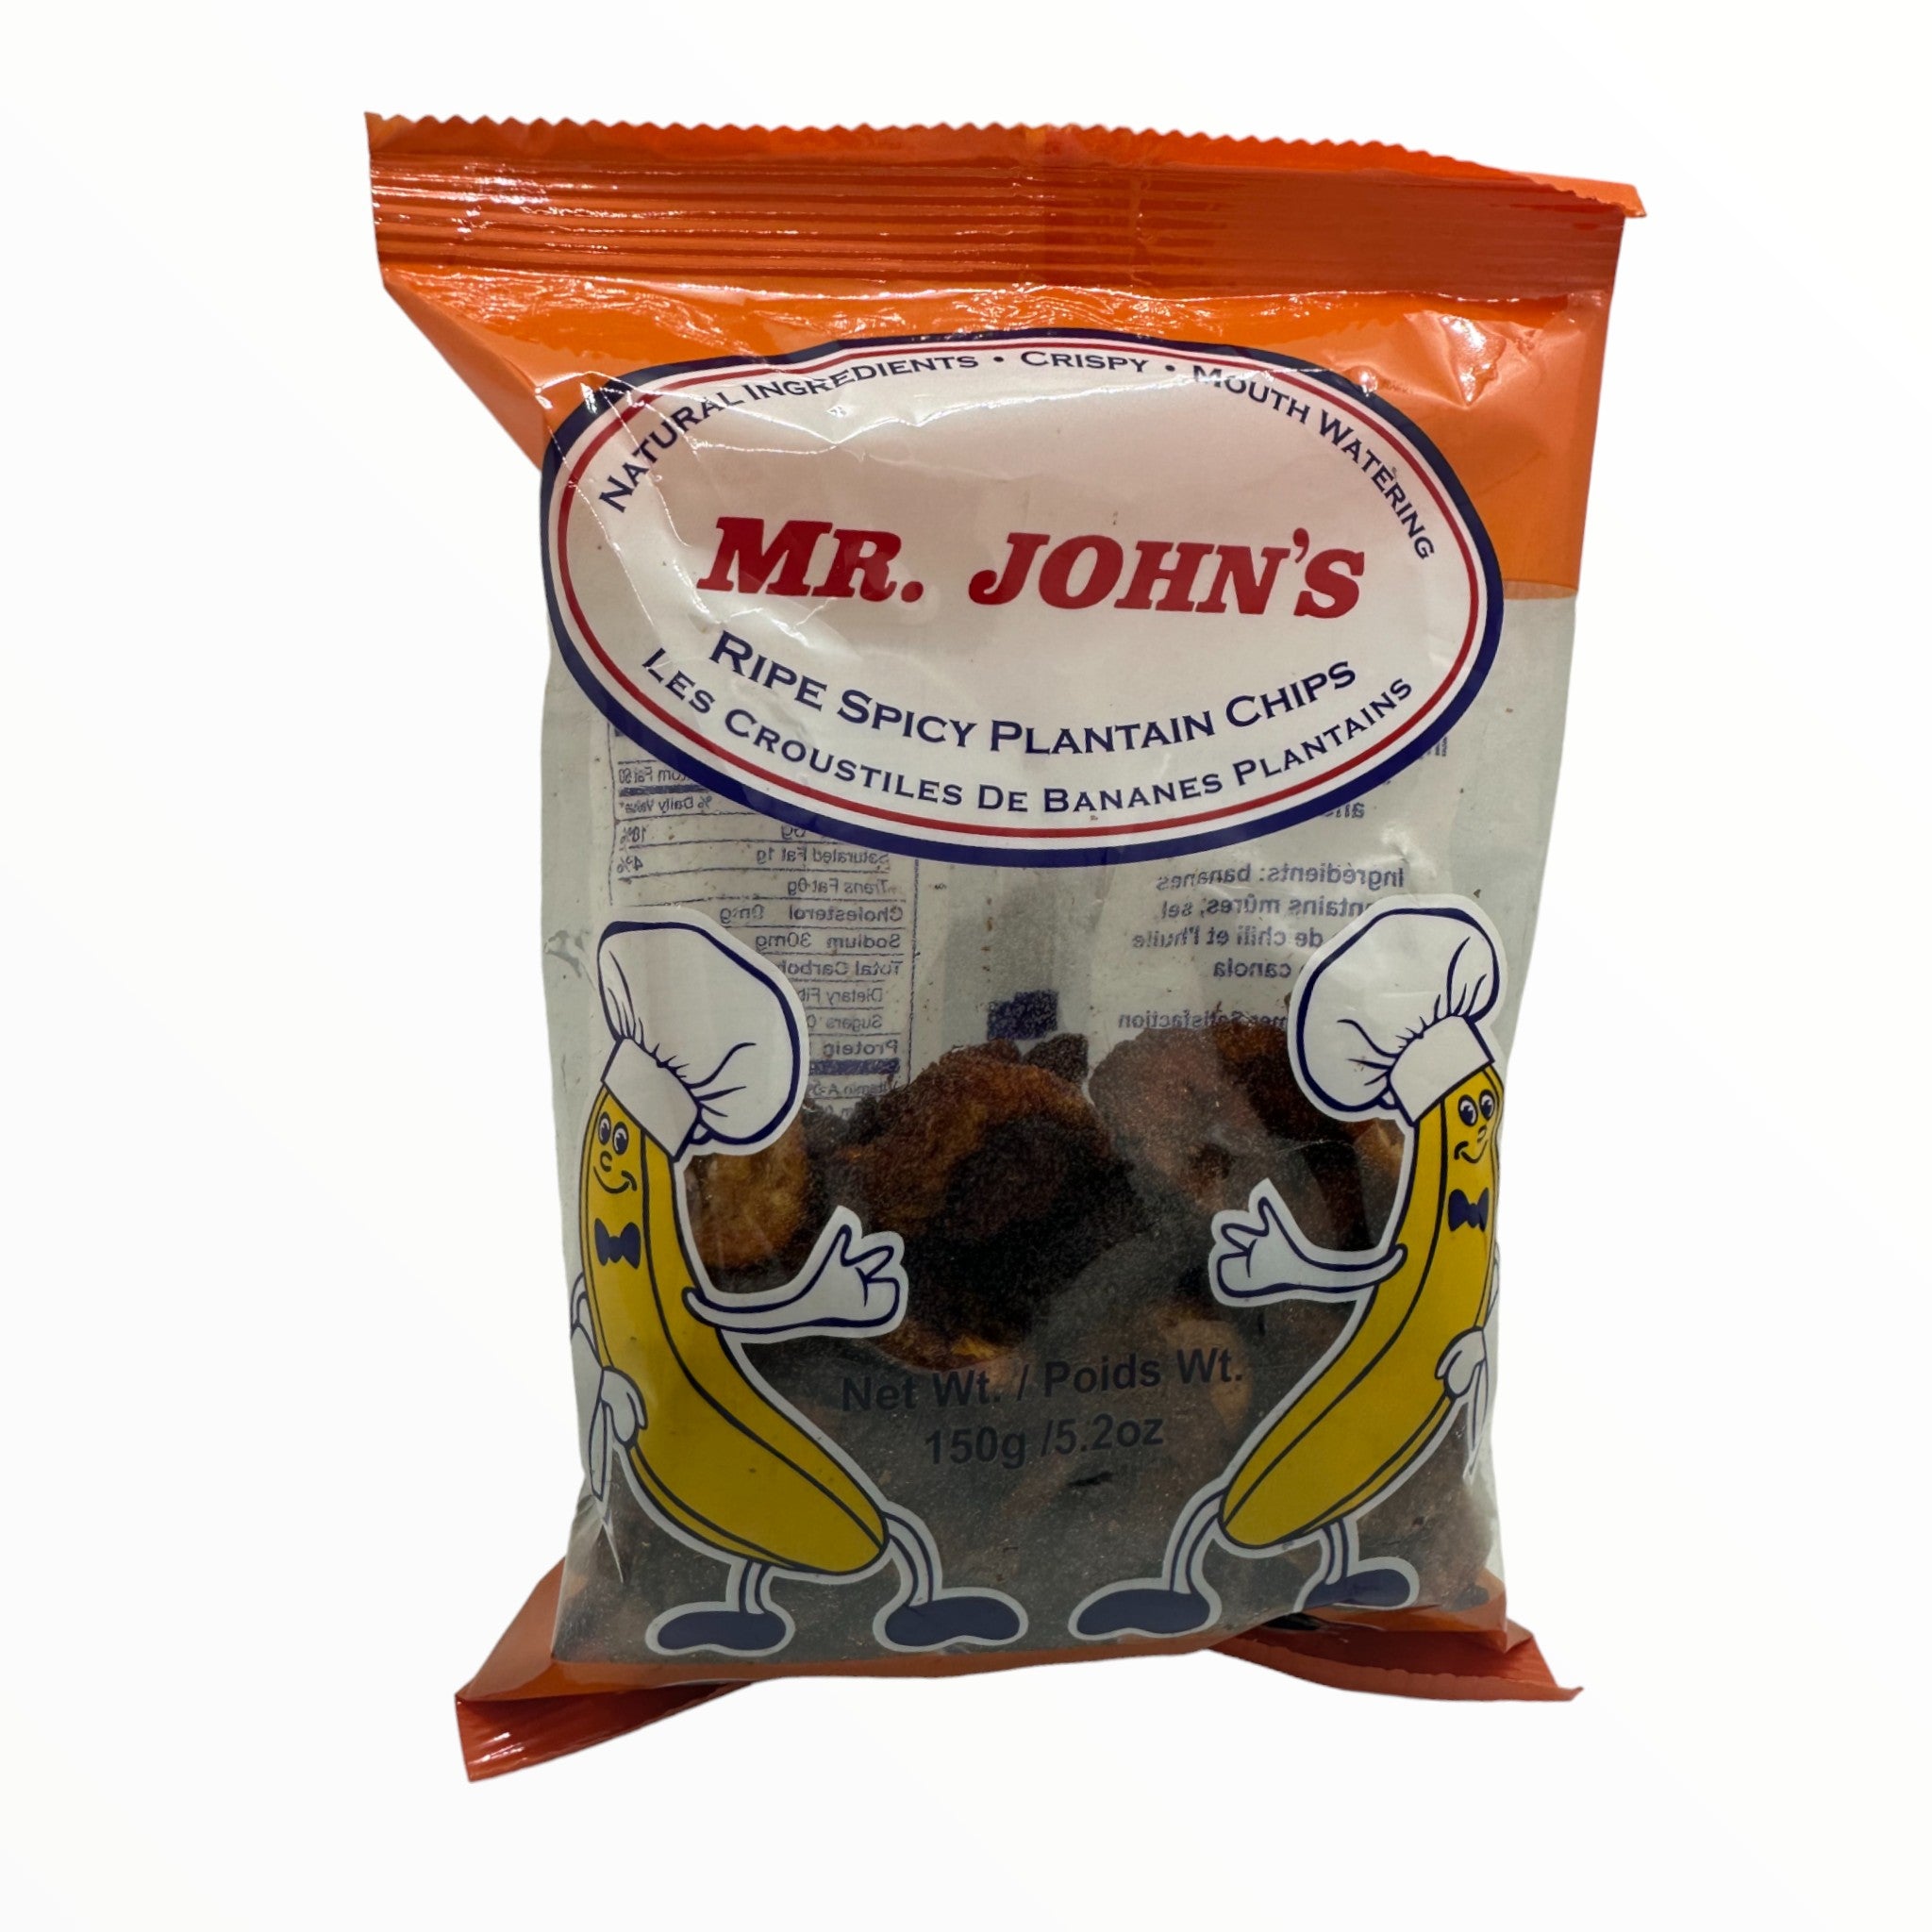 Mr John's Ripe Spicy Plantain Chips